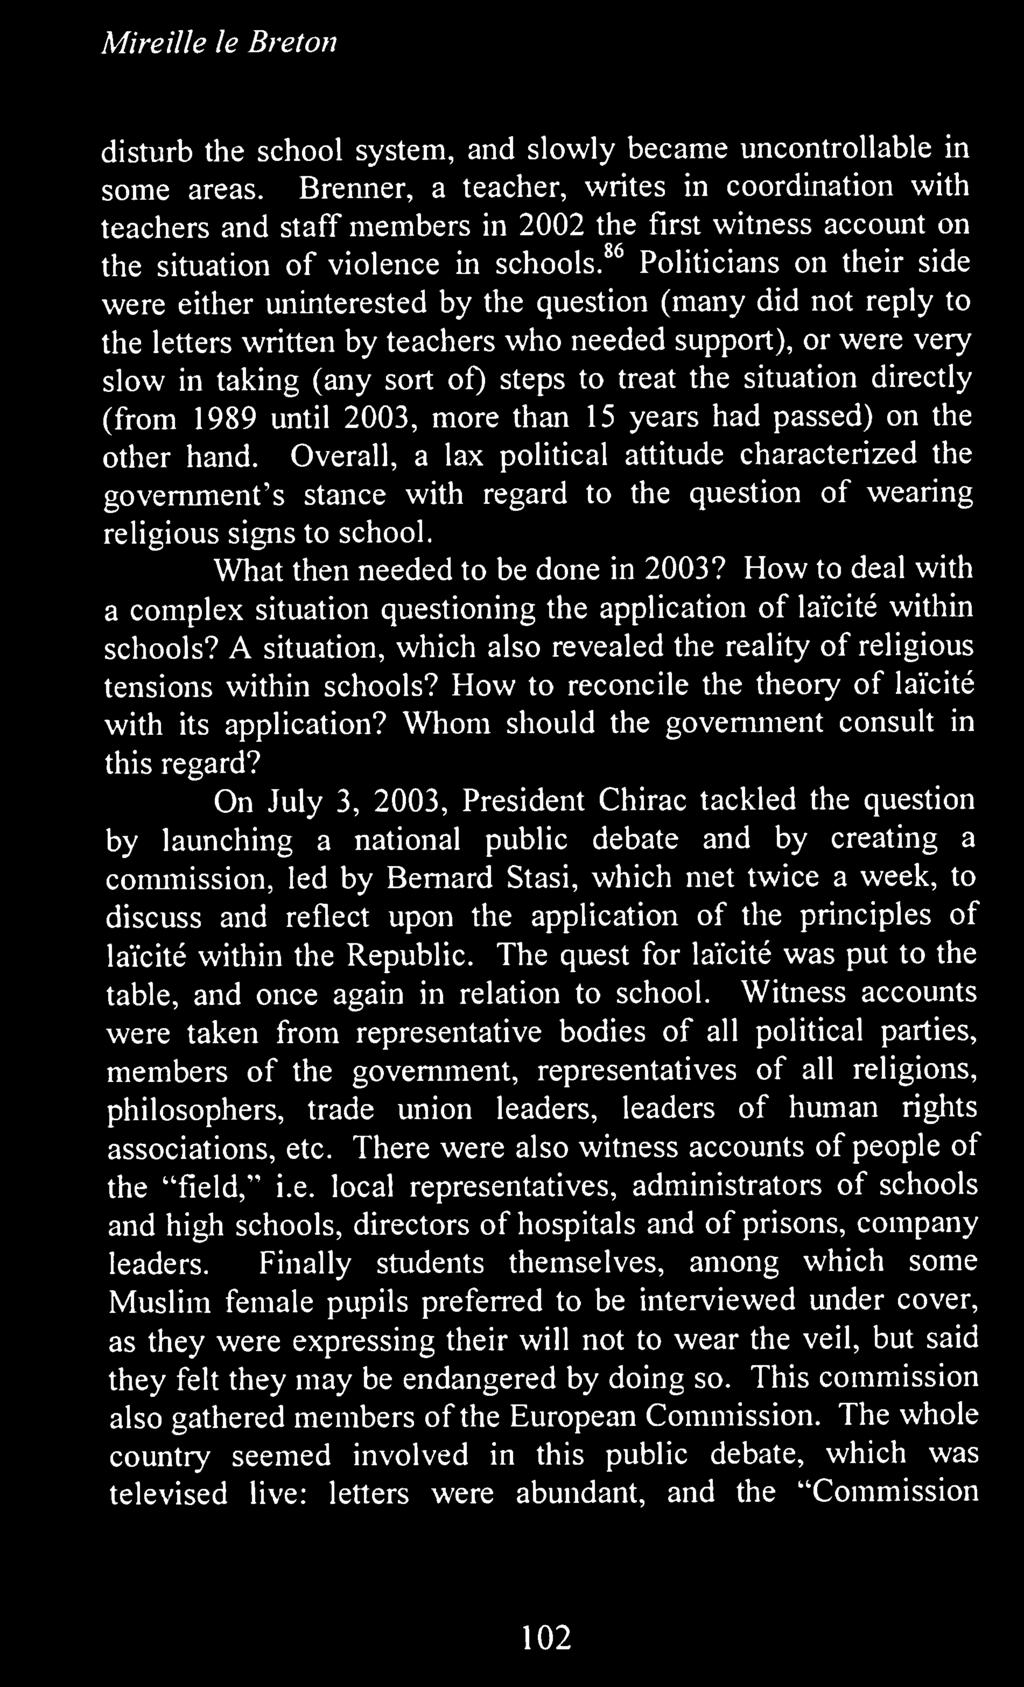 Overall, a lax political attitude characterized the government's stance with regard to the question of wearing religious signs to school. What then needed to be done in 2003?